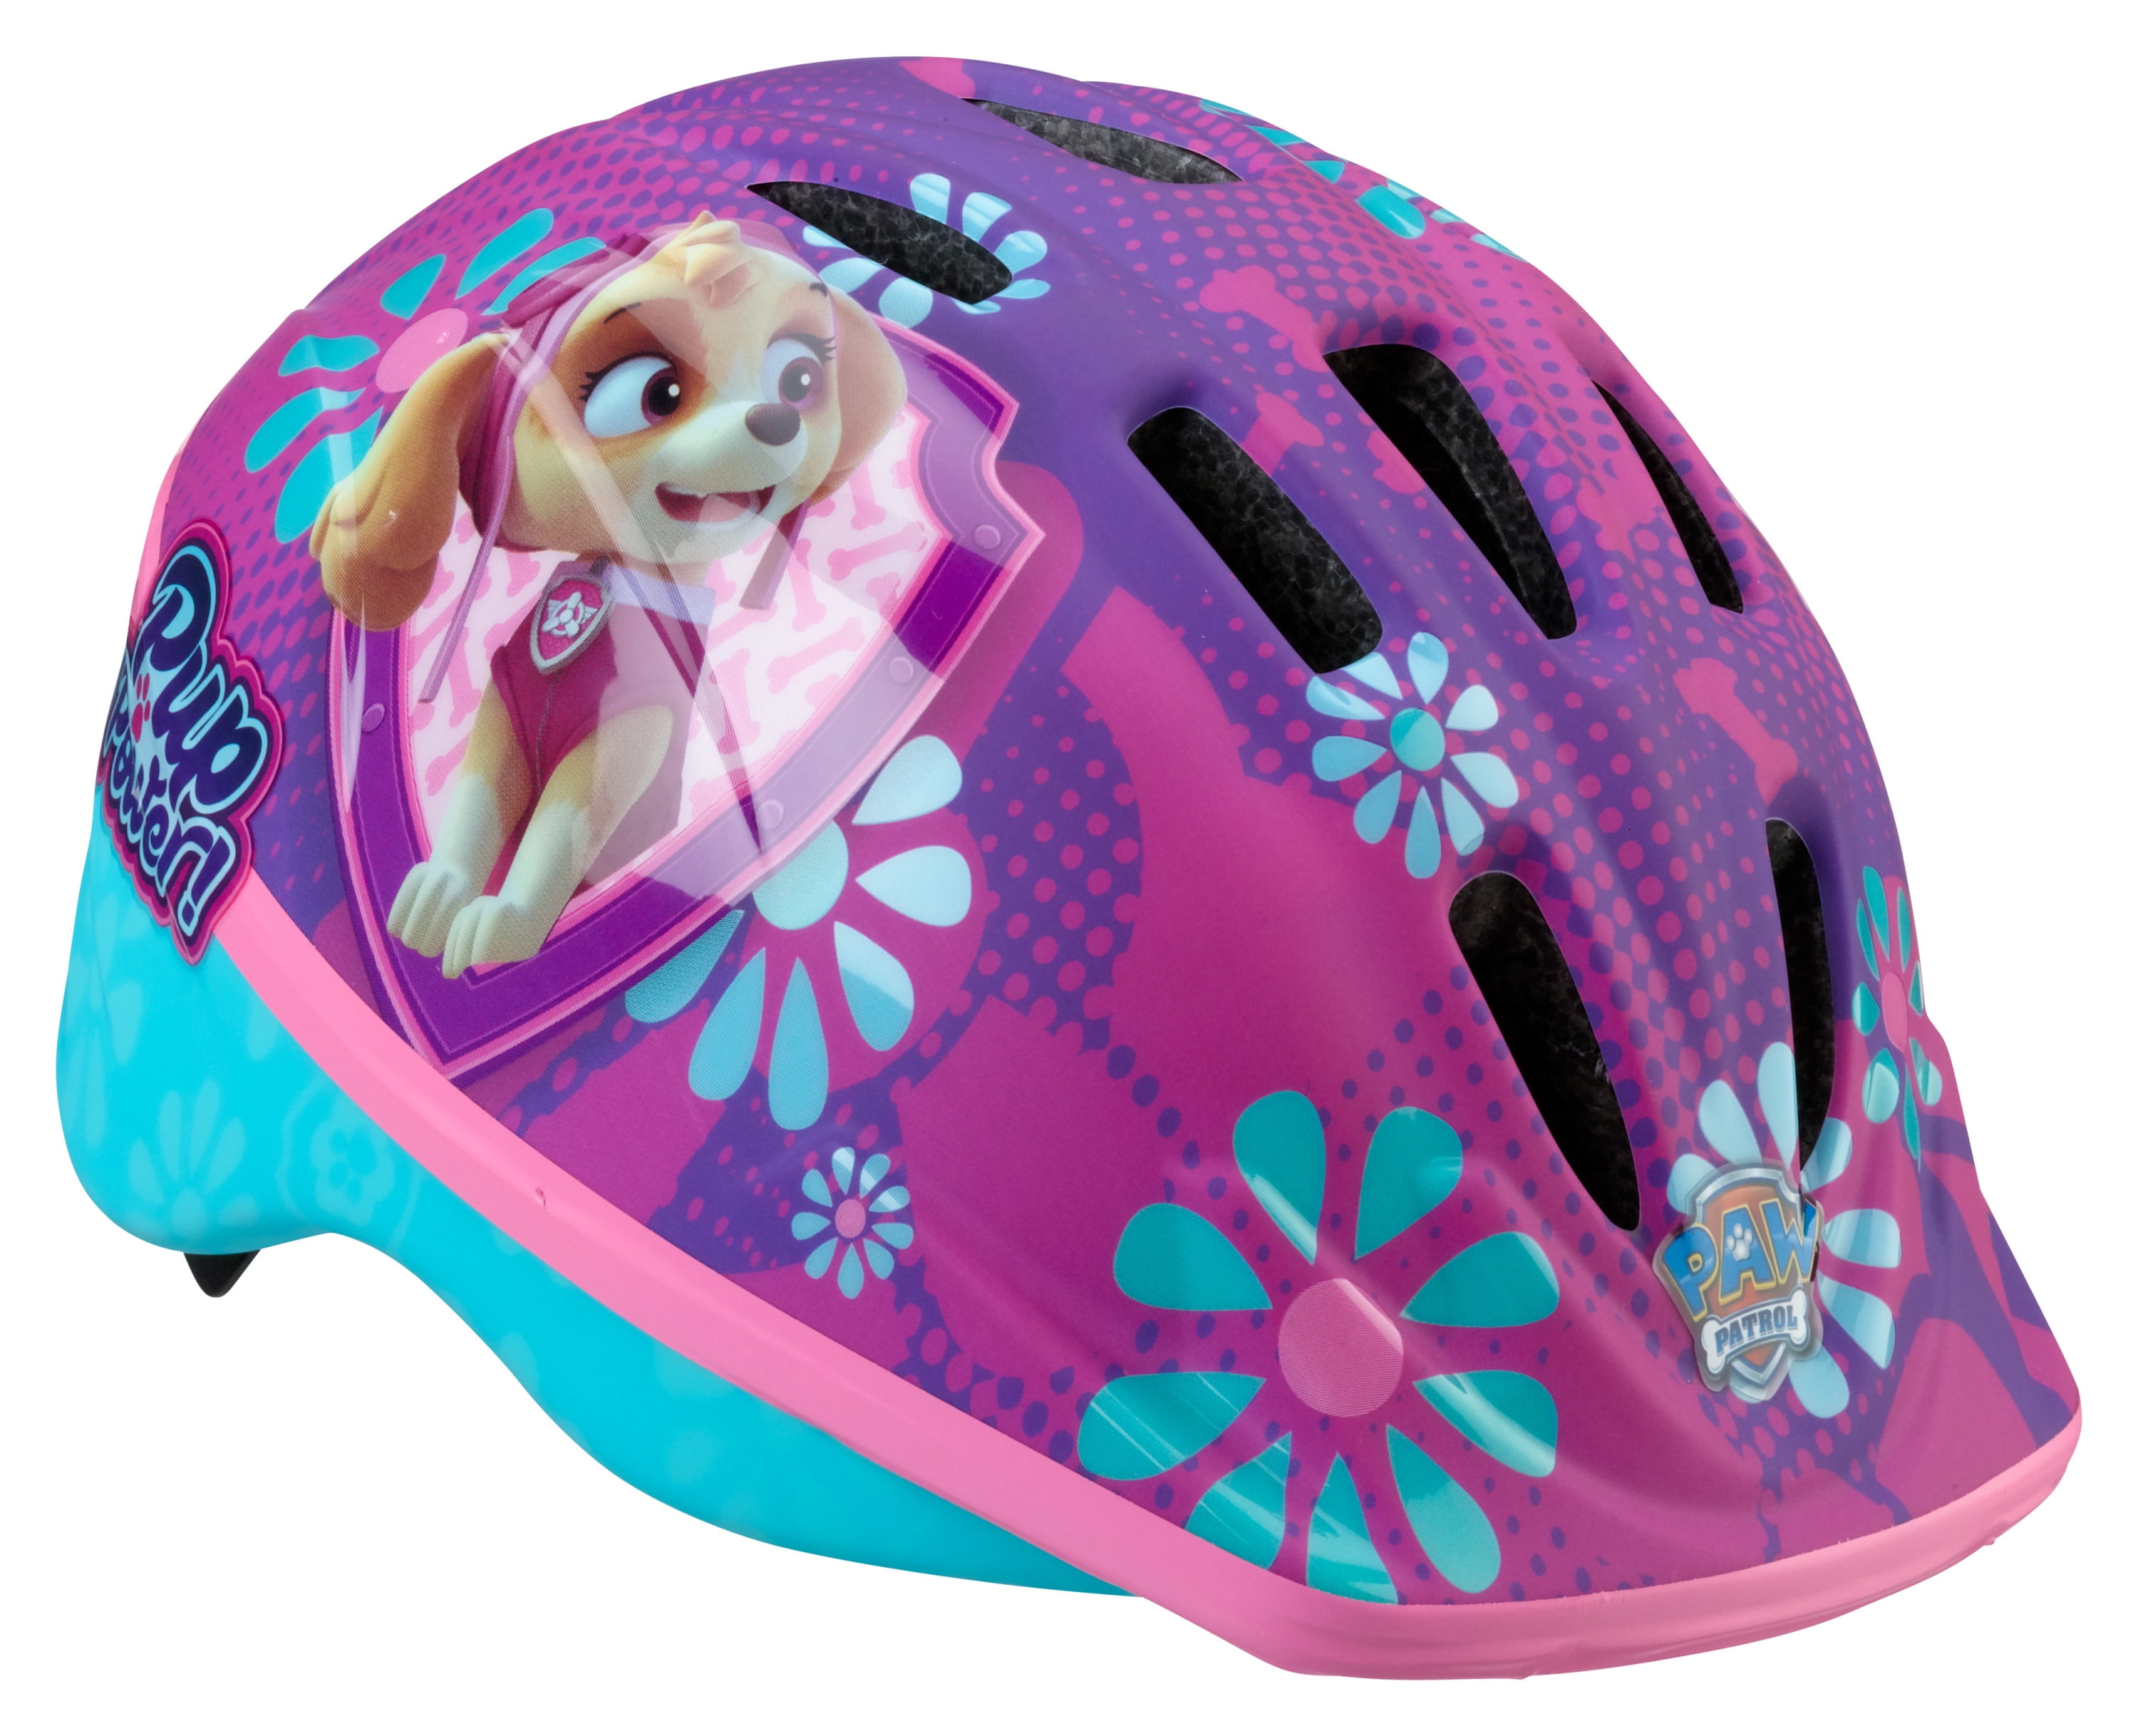 Details about   Bell Disney MINNIE MOUSE BICYCLE HELMET Pink & Teal Glitter Graphics Toddler 3+ 